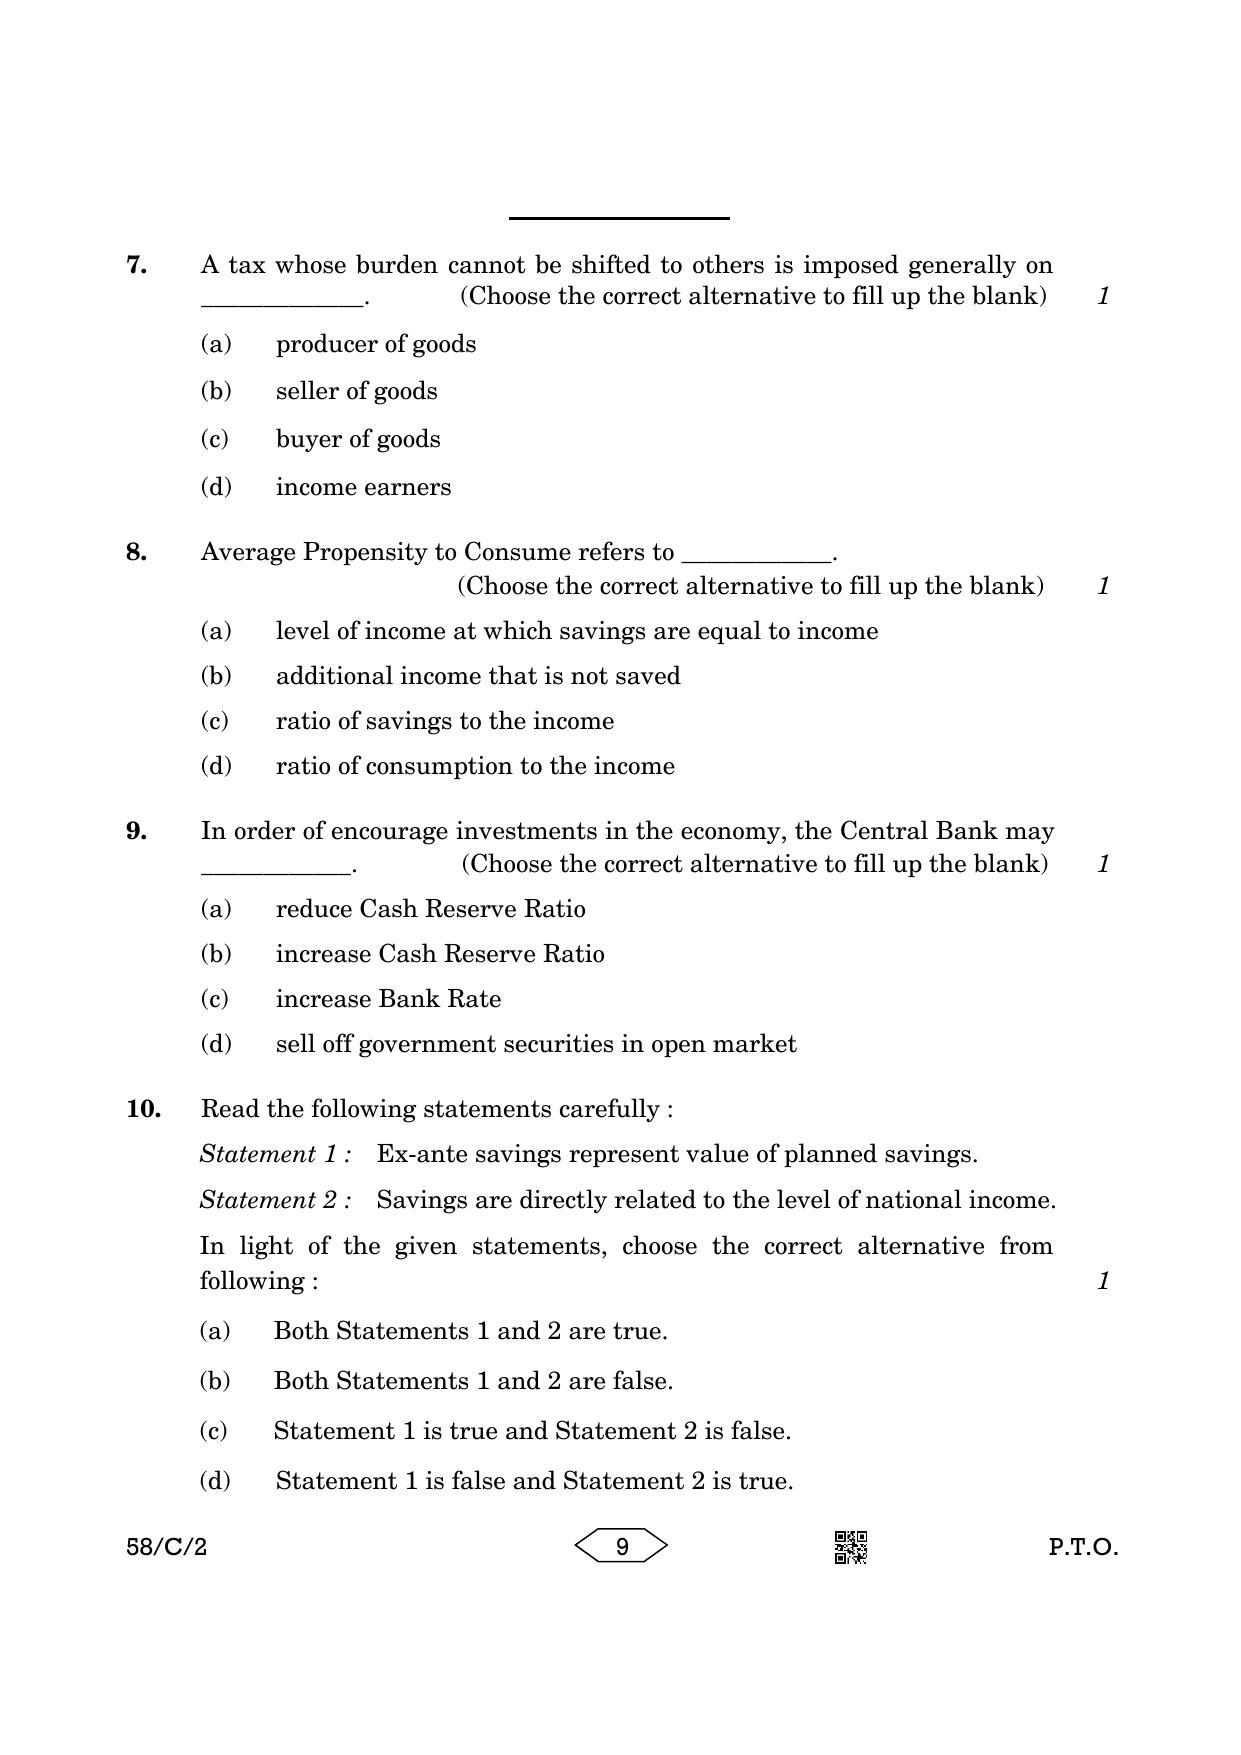 CBSE Class 12 58-2 Chemistry 2023 (Compartment) Question Paper - Page 9